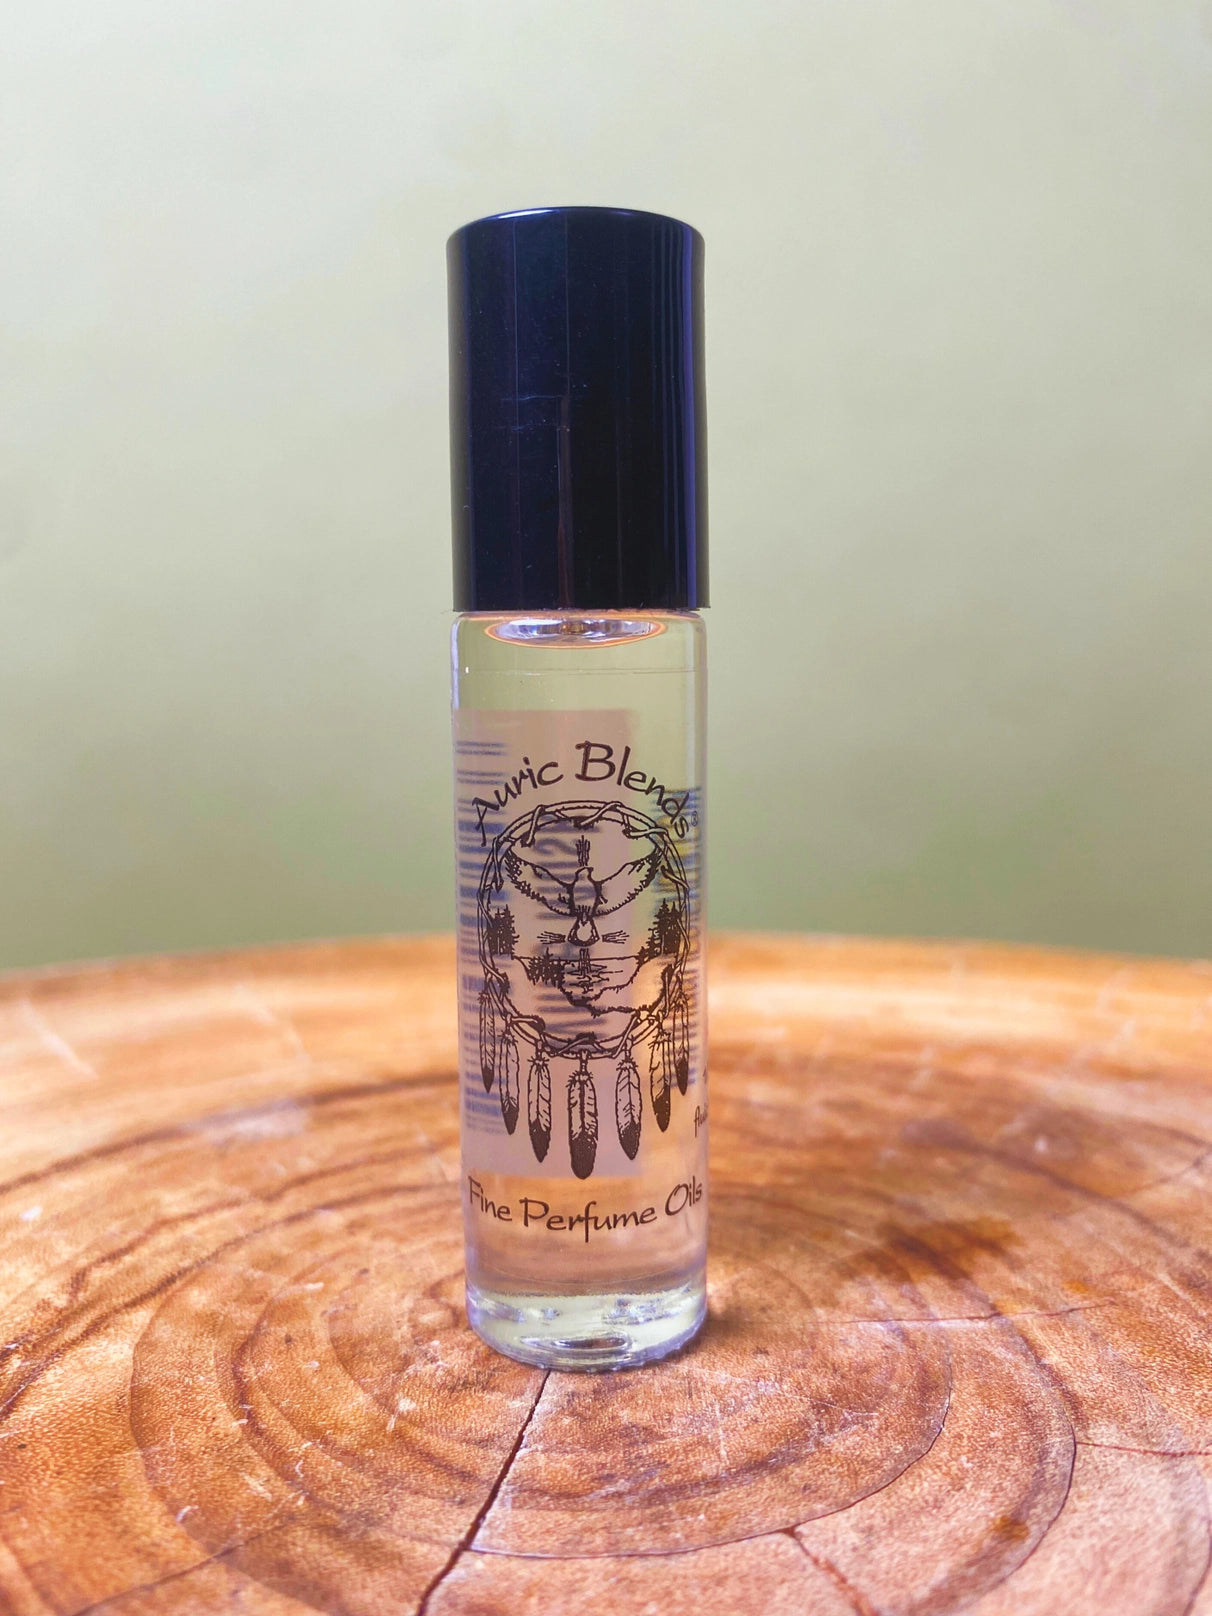 White Musk Roll-On Perfume Oil by Auric Blends - Moon Room Shop and Wellness